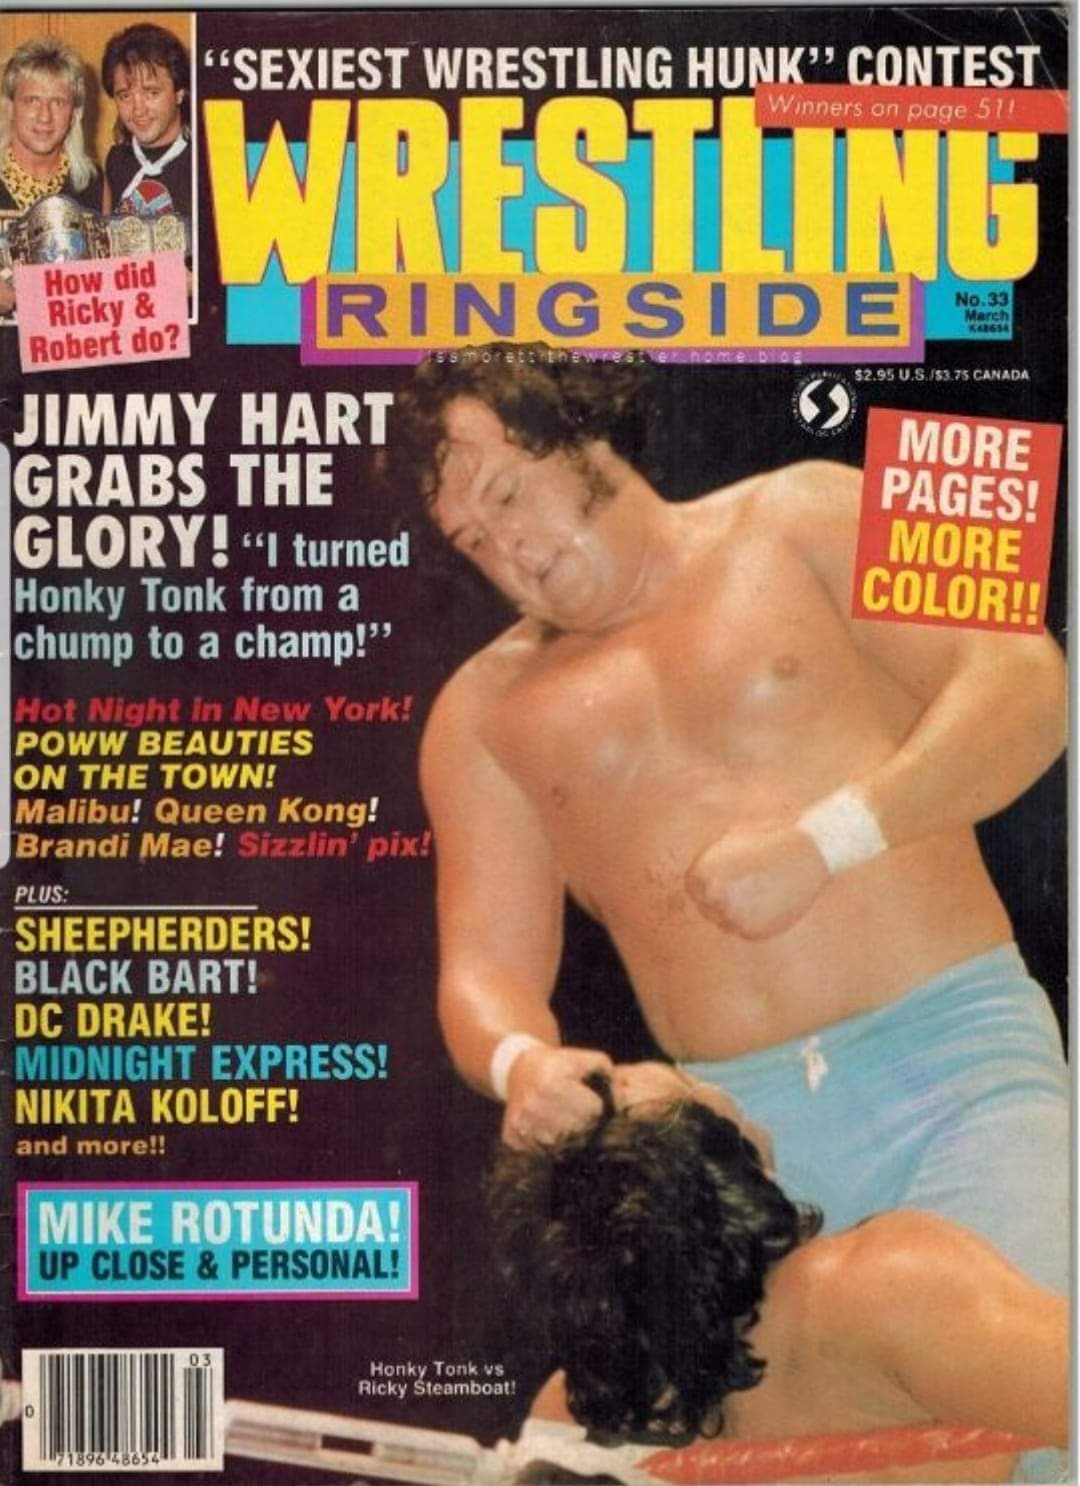 Honky Tonk Man on the cover of Wrestling Ringside in March 1988.